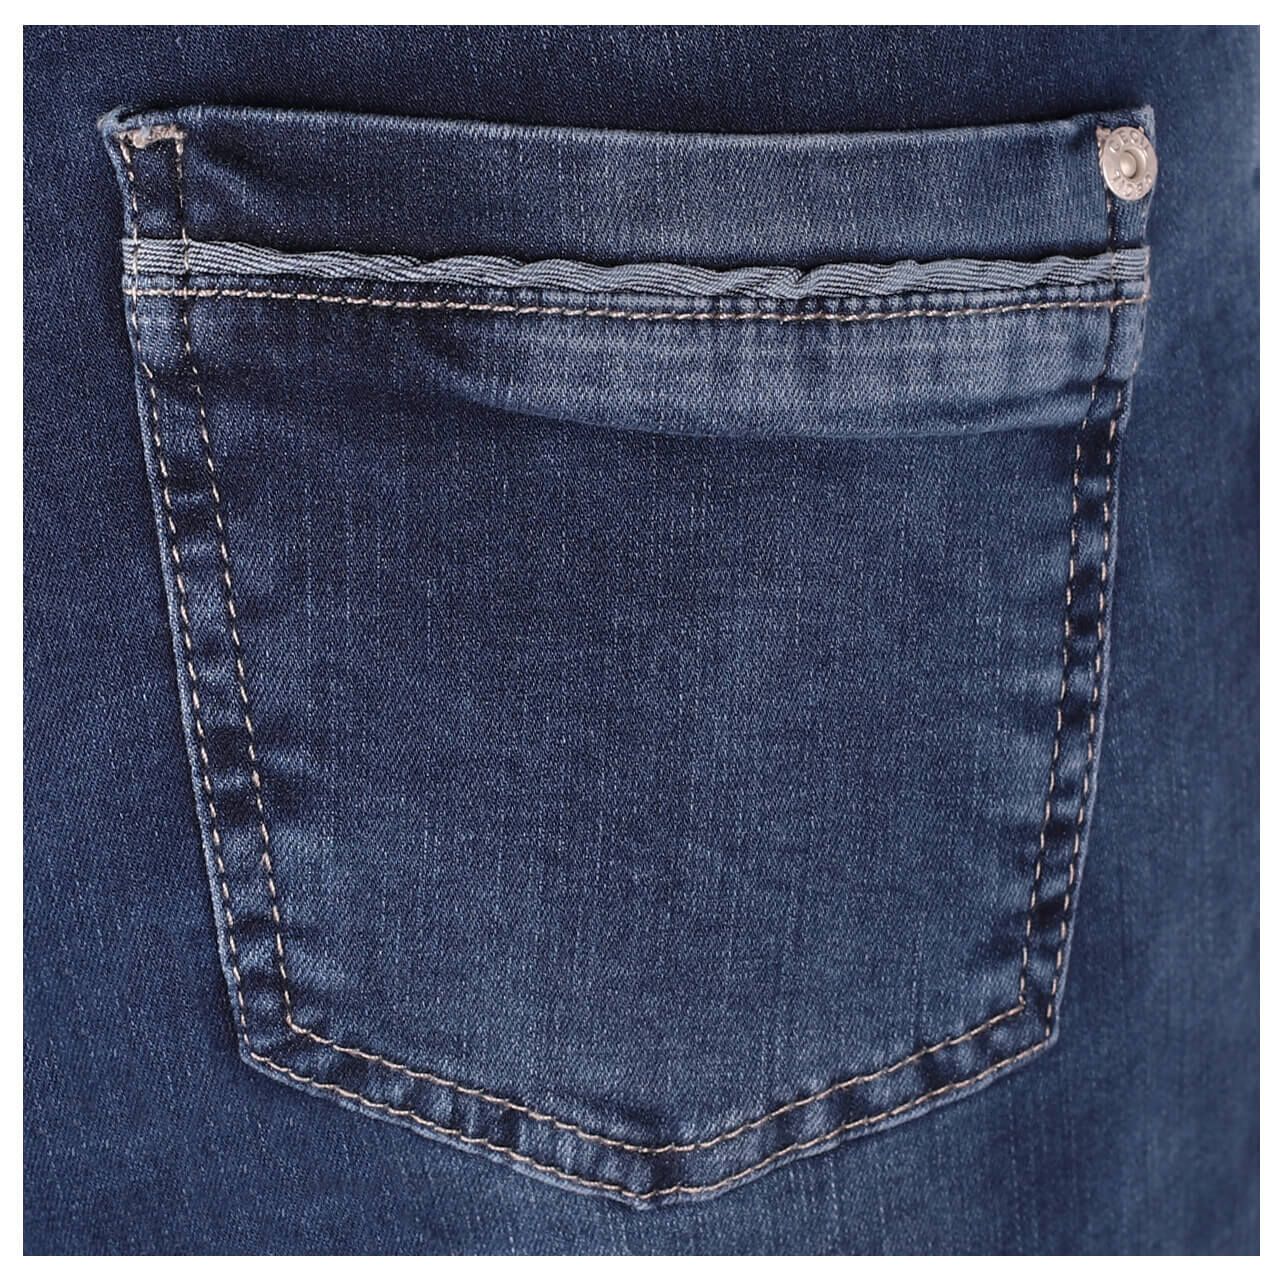 Cecil Toronto Jeans blue washed